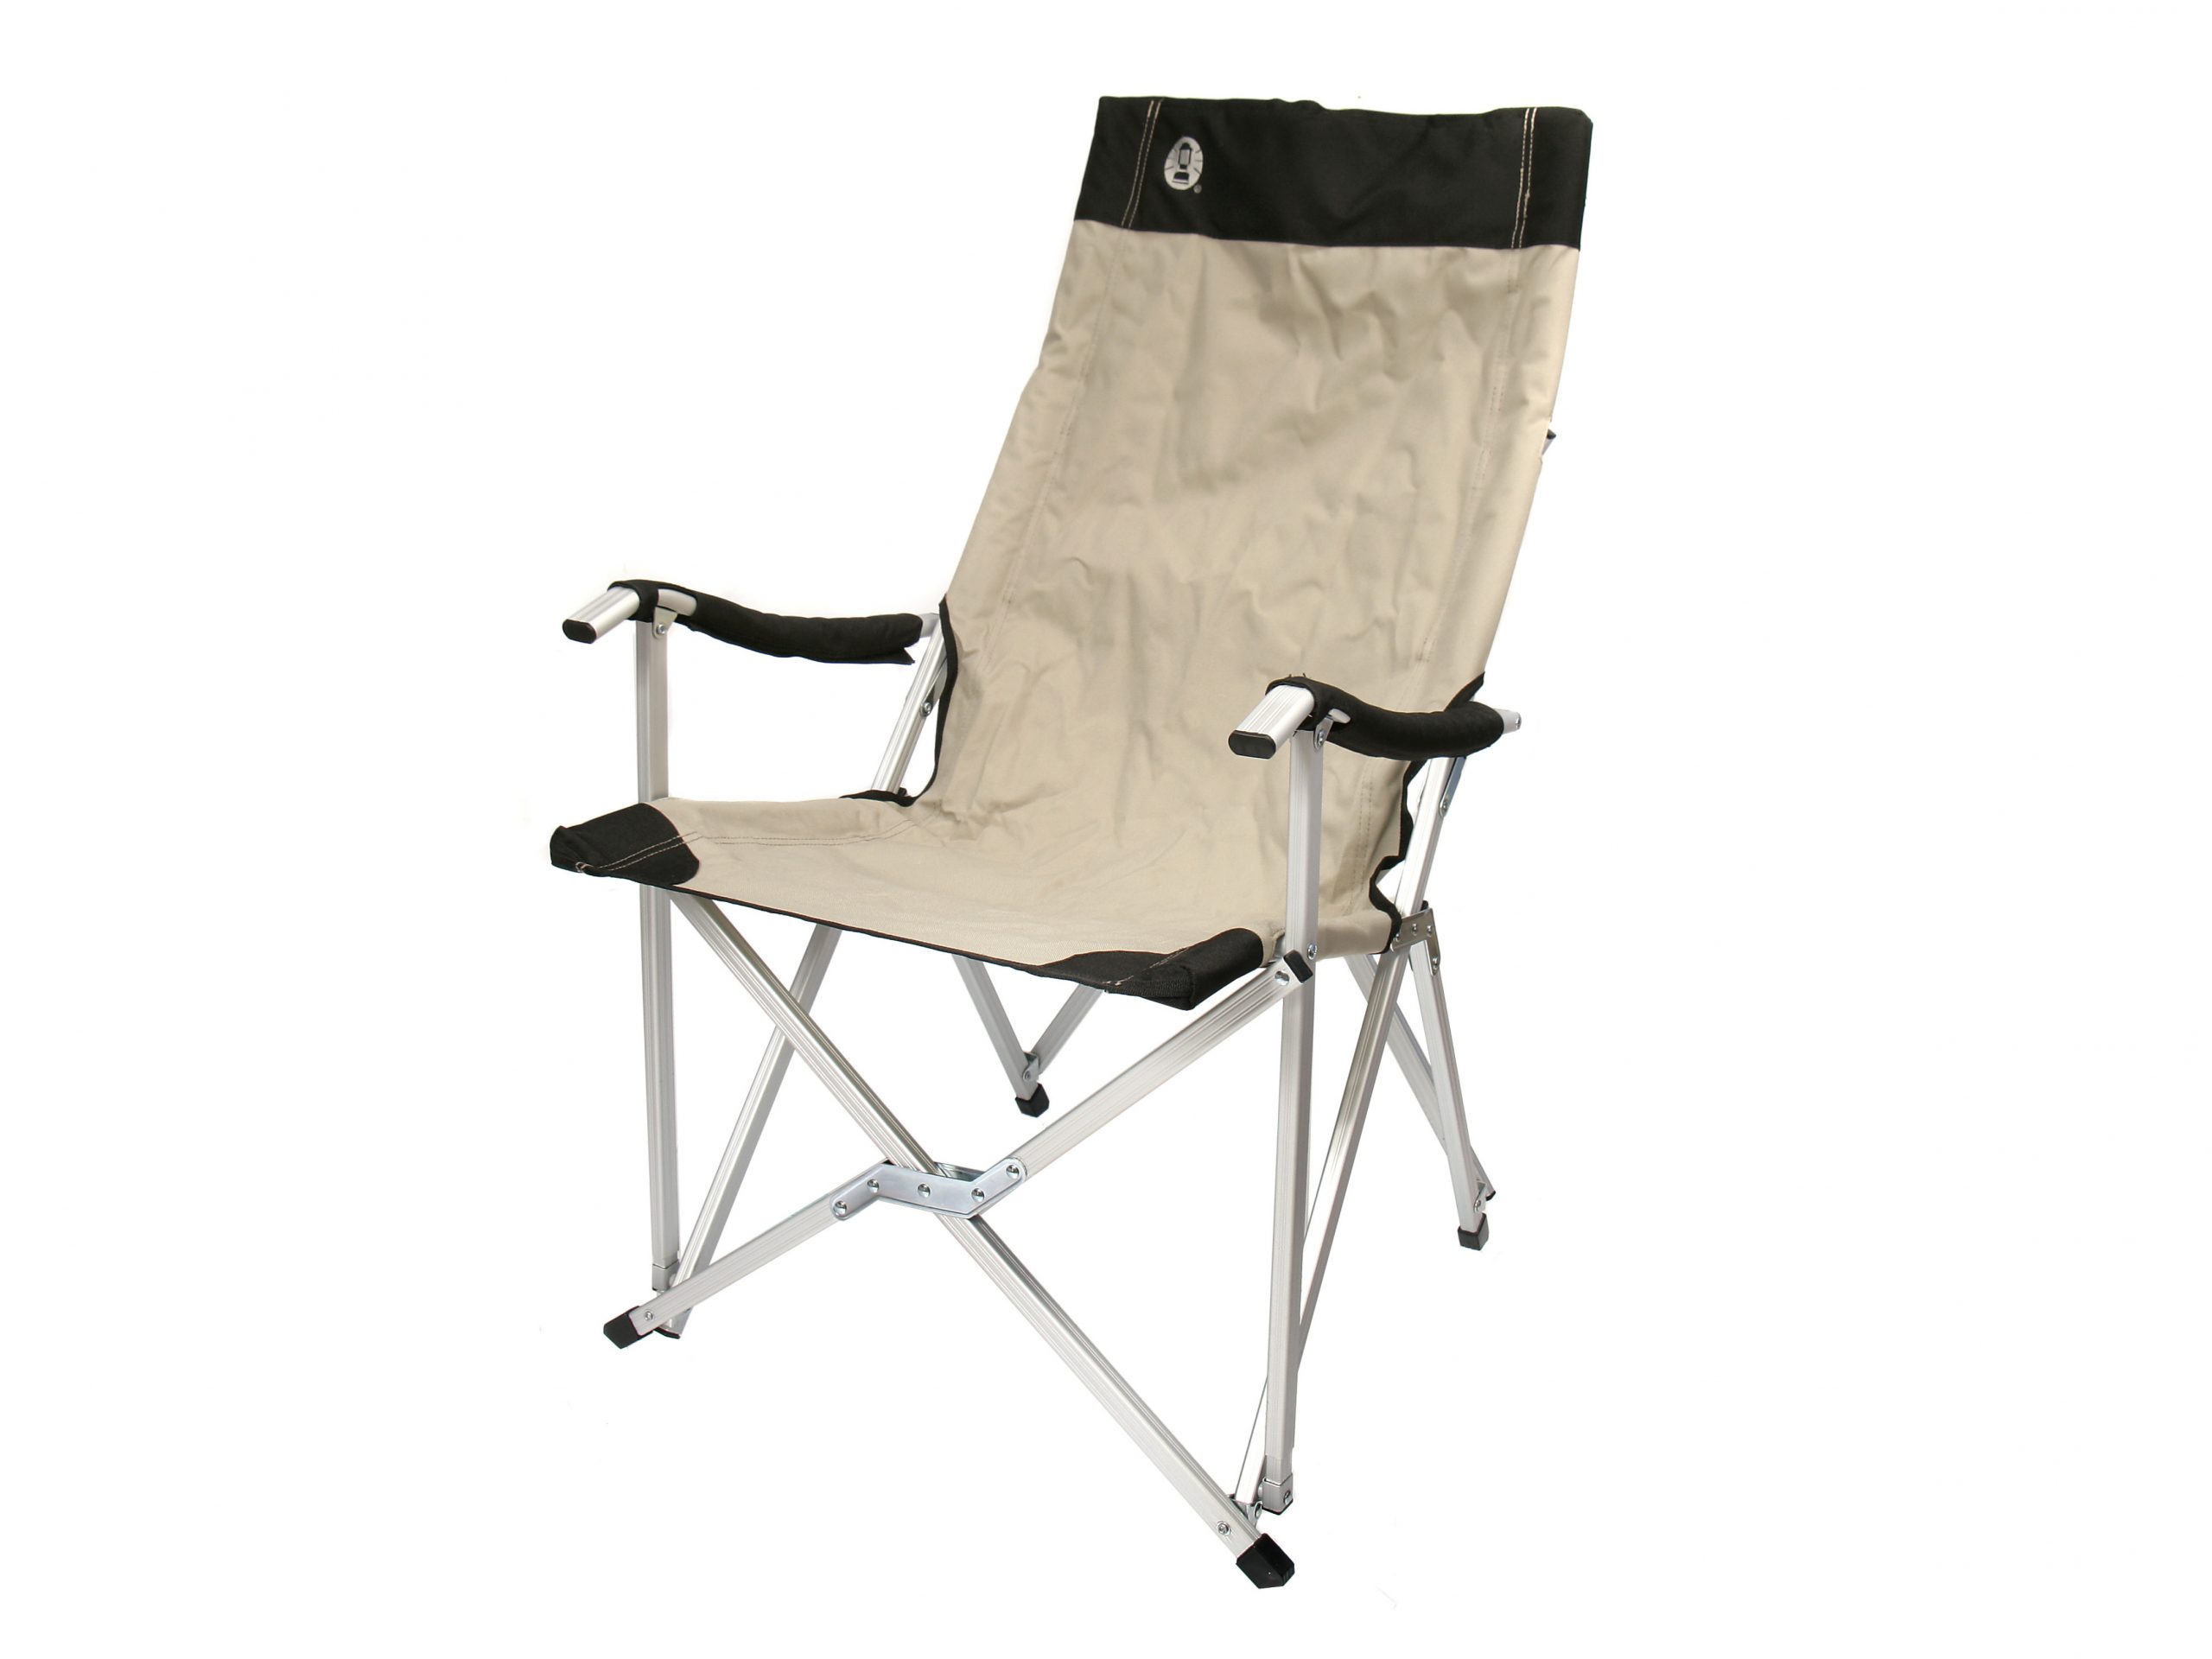 Coleman Sling Chair review: a stylish chair that's built for relaxing